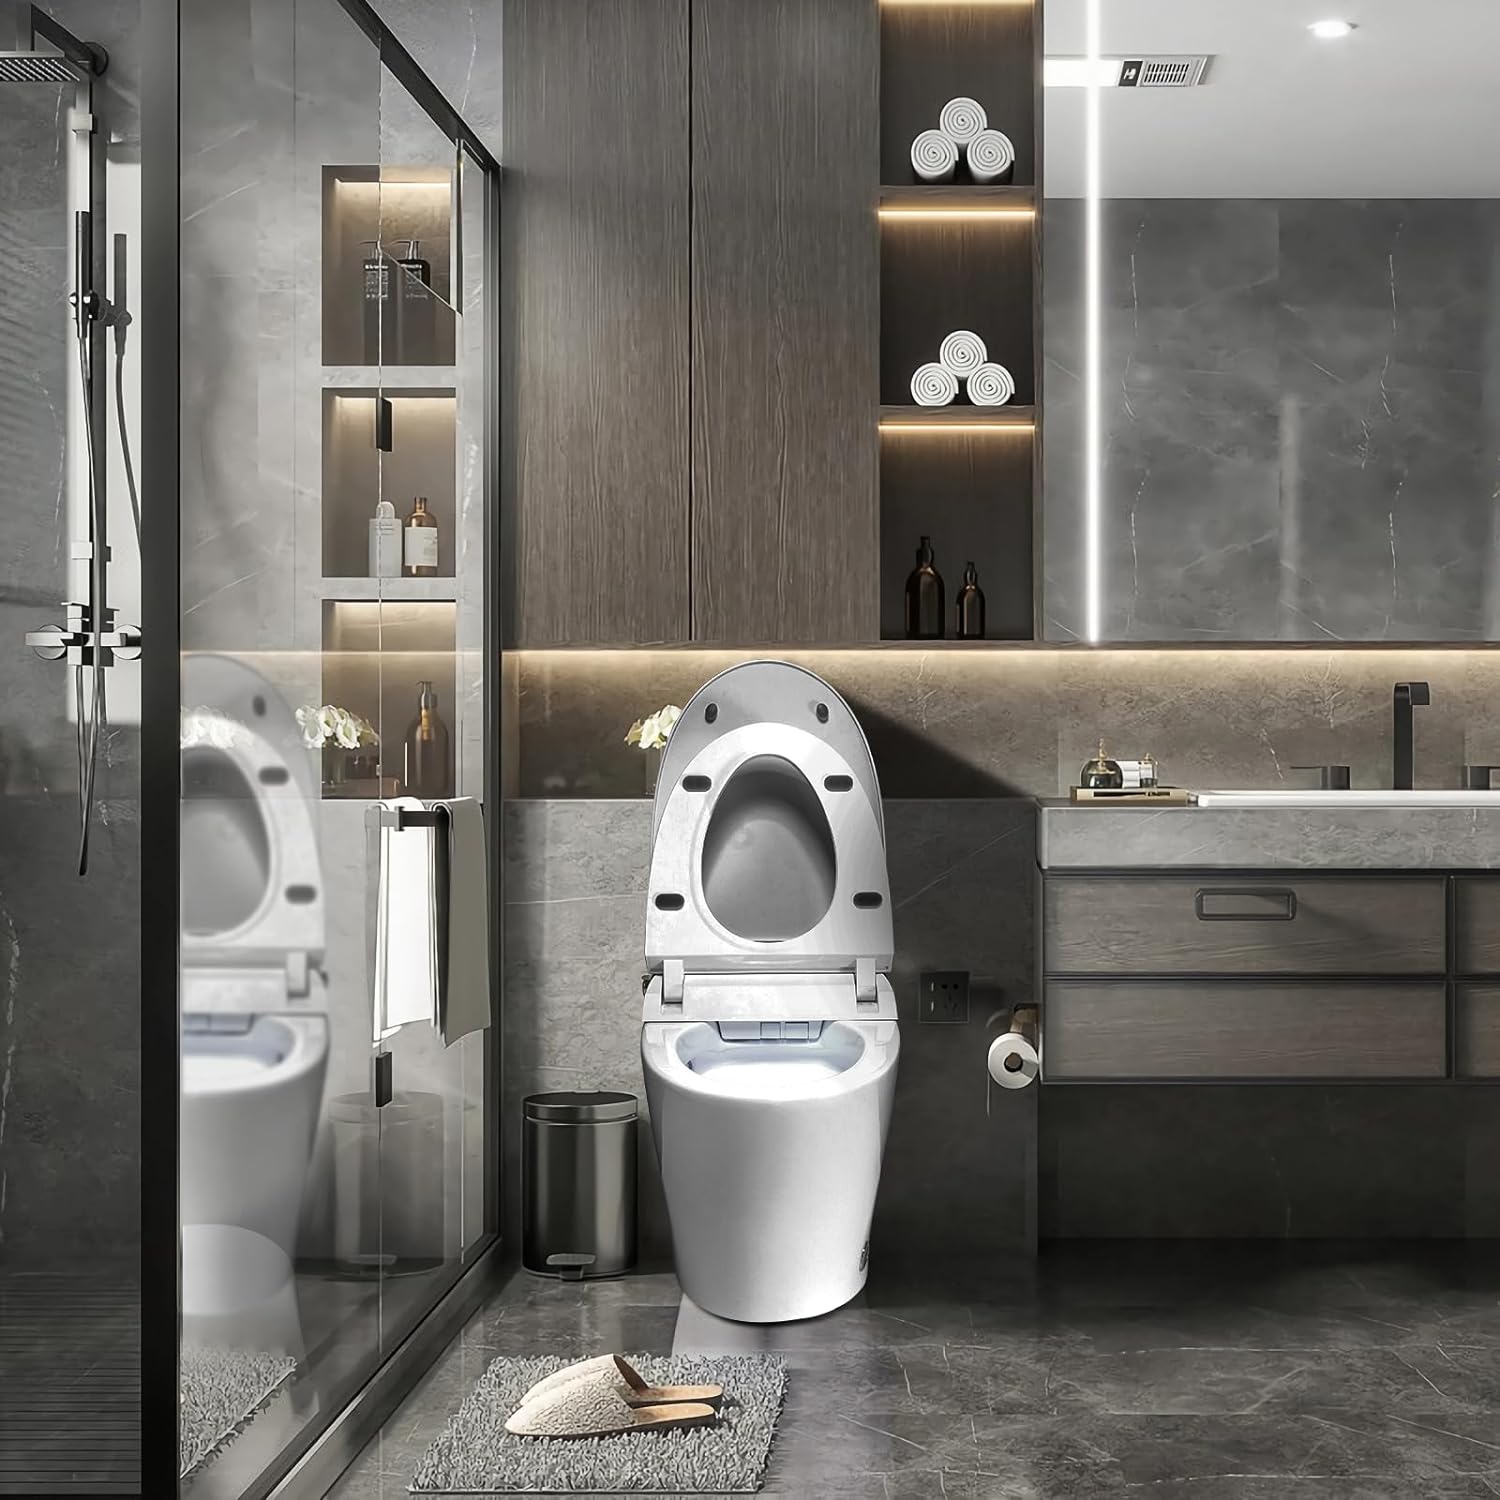 Smart Bidet Toilet | Self Cleaning Smart Toilet Bidet All In One | Japanese Heated Tankless Toilet With Multi Mode Cleaning, Drying, Heated Seat, Auto Flush, Kick Open, Soft Close